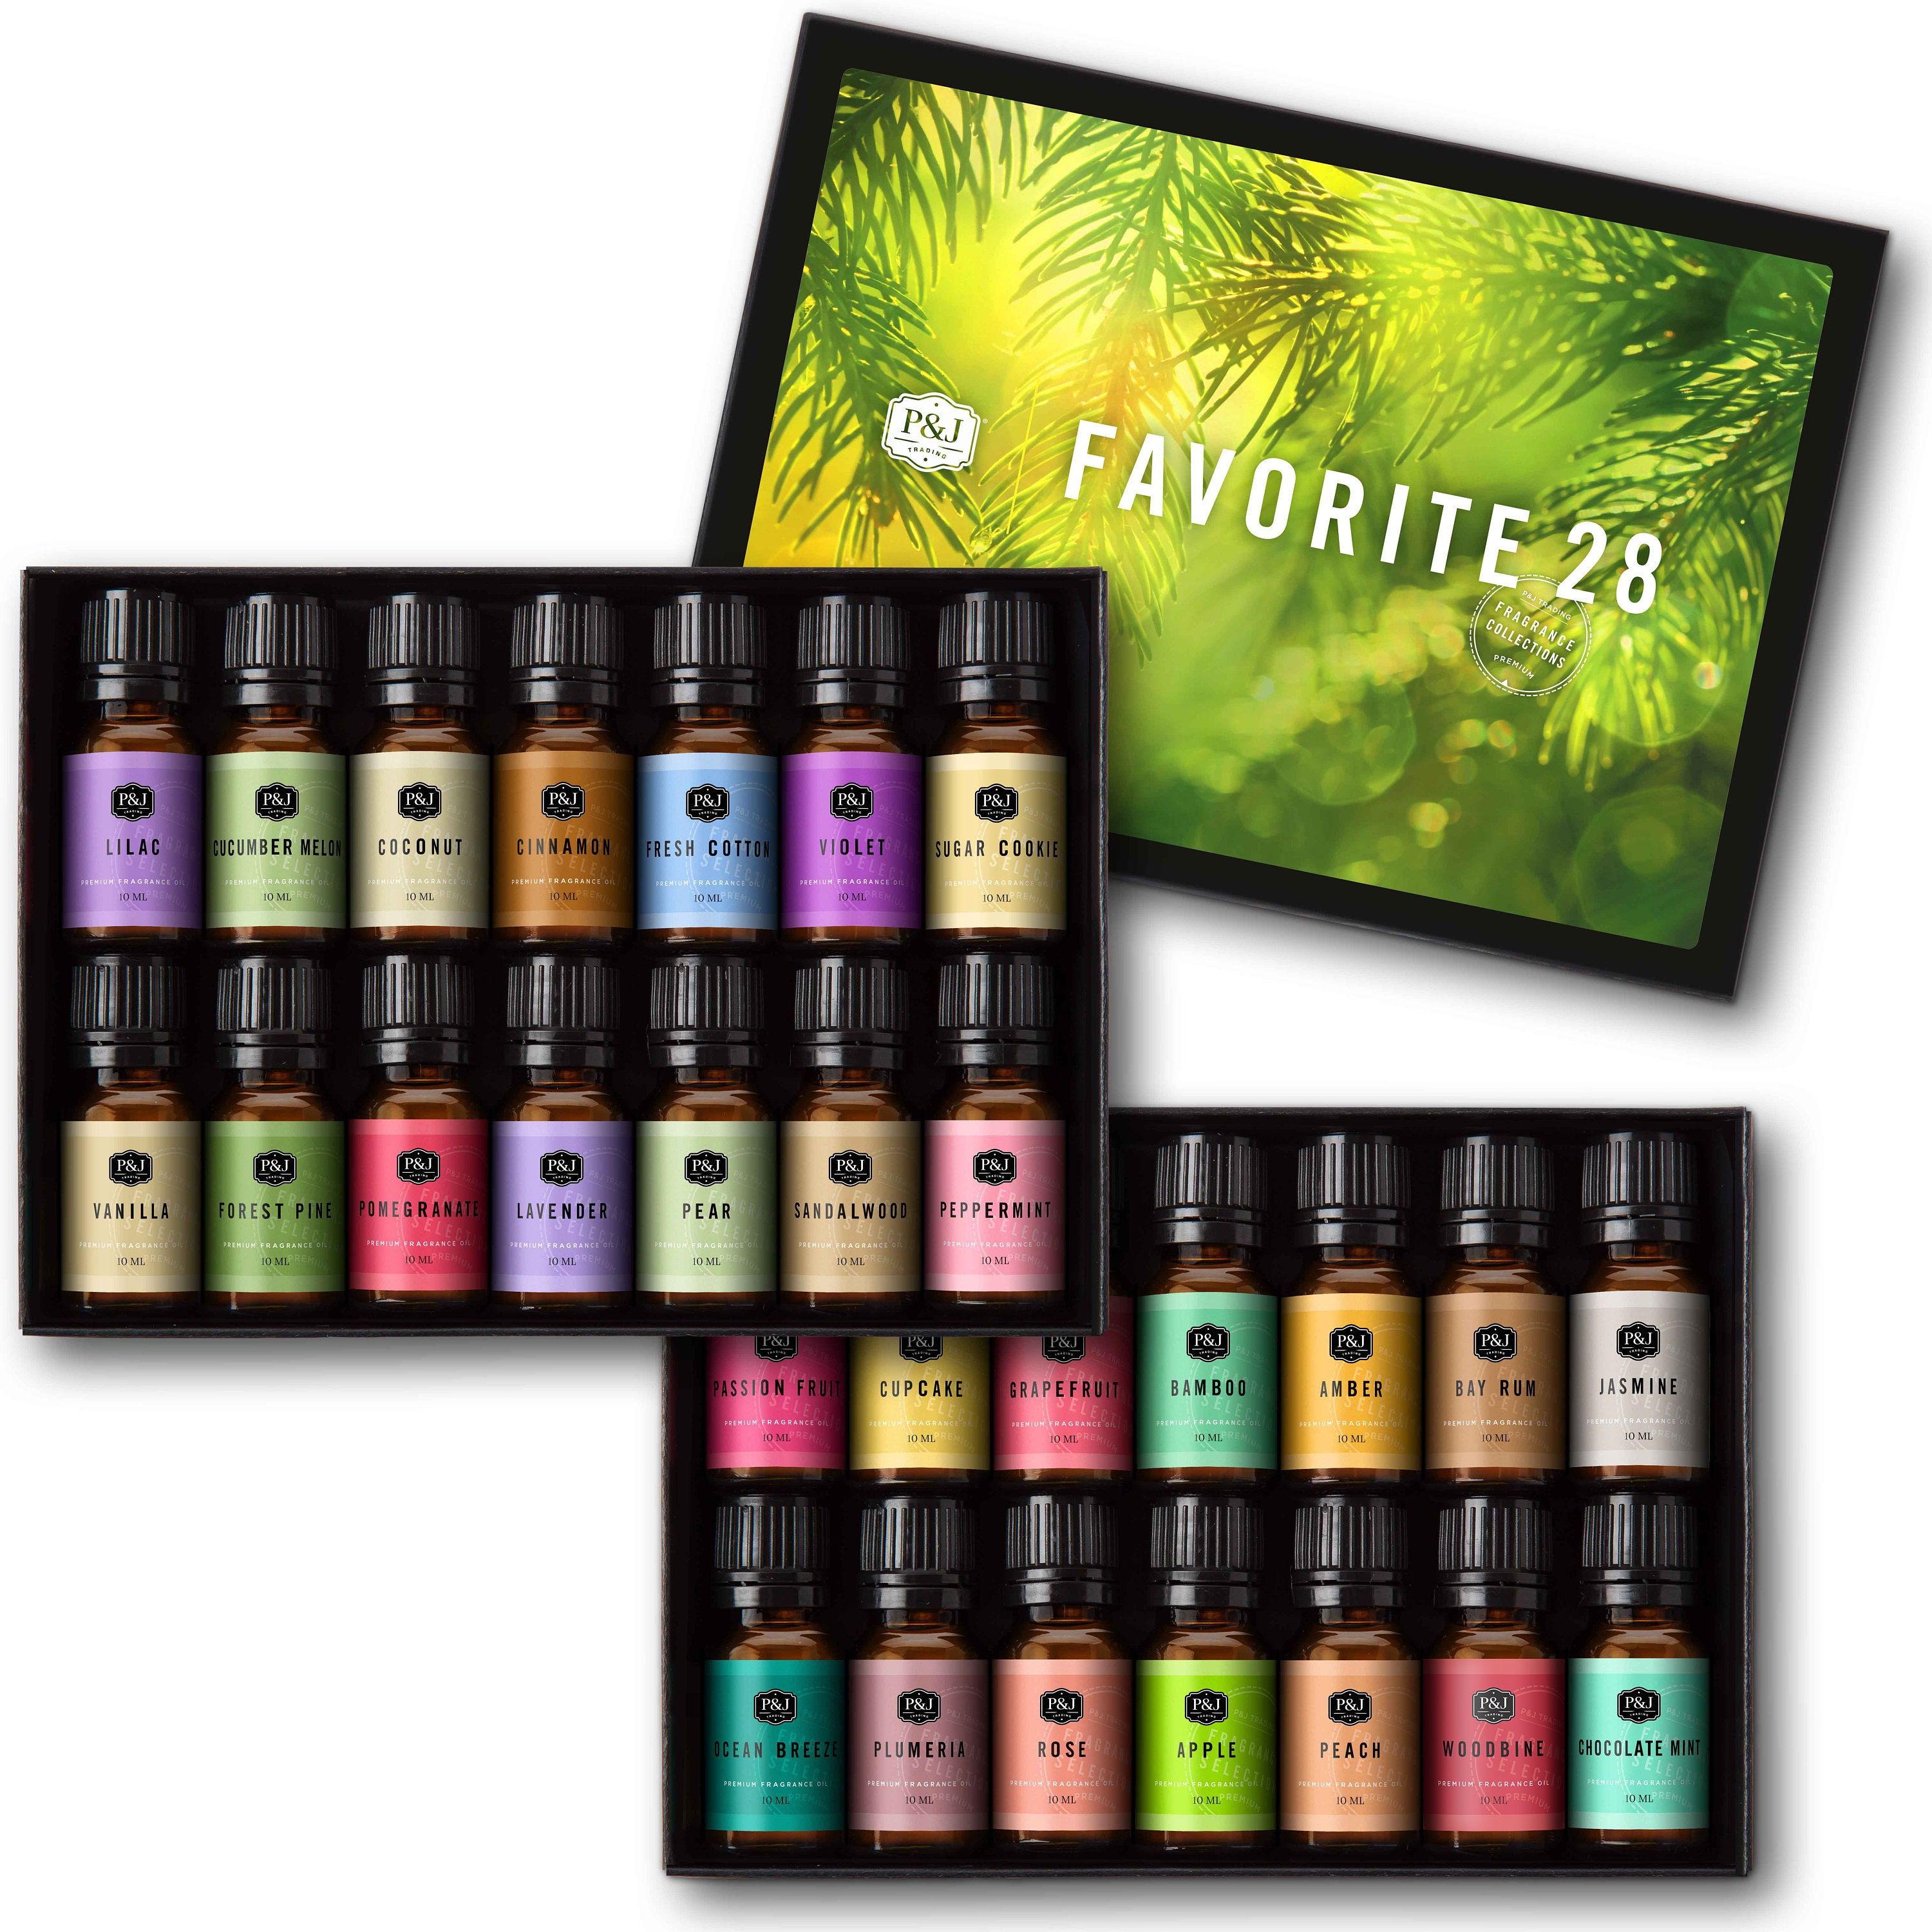 P&j Trading Fragrance Oil | Summer Flowers Set of 6 - Scented Oil for Soap Making, Diffusers, Candle Making, Lotions, Haircare, Slime, and Home